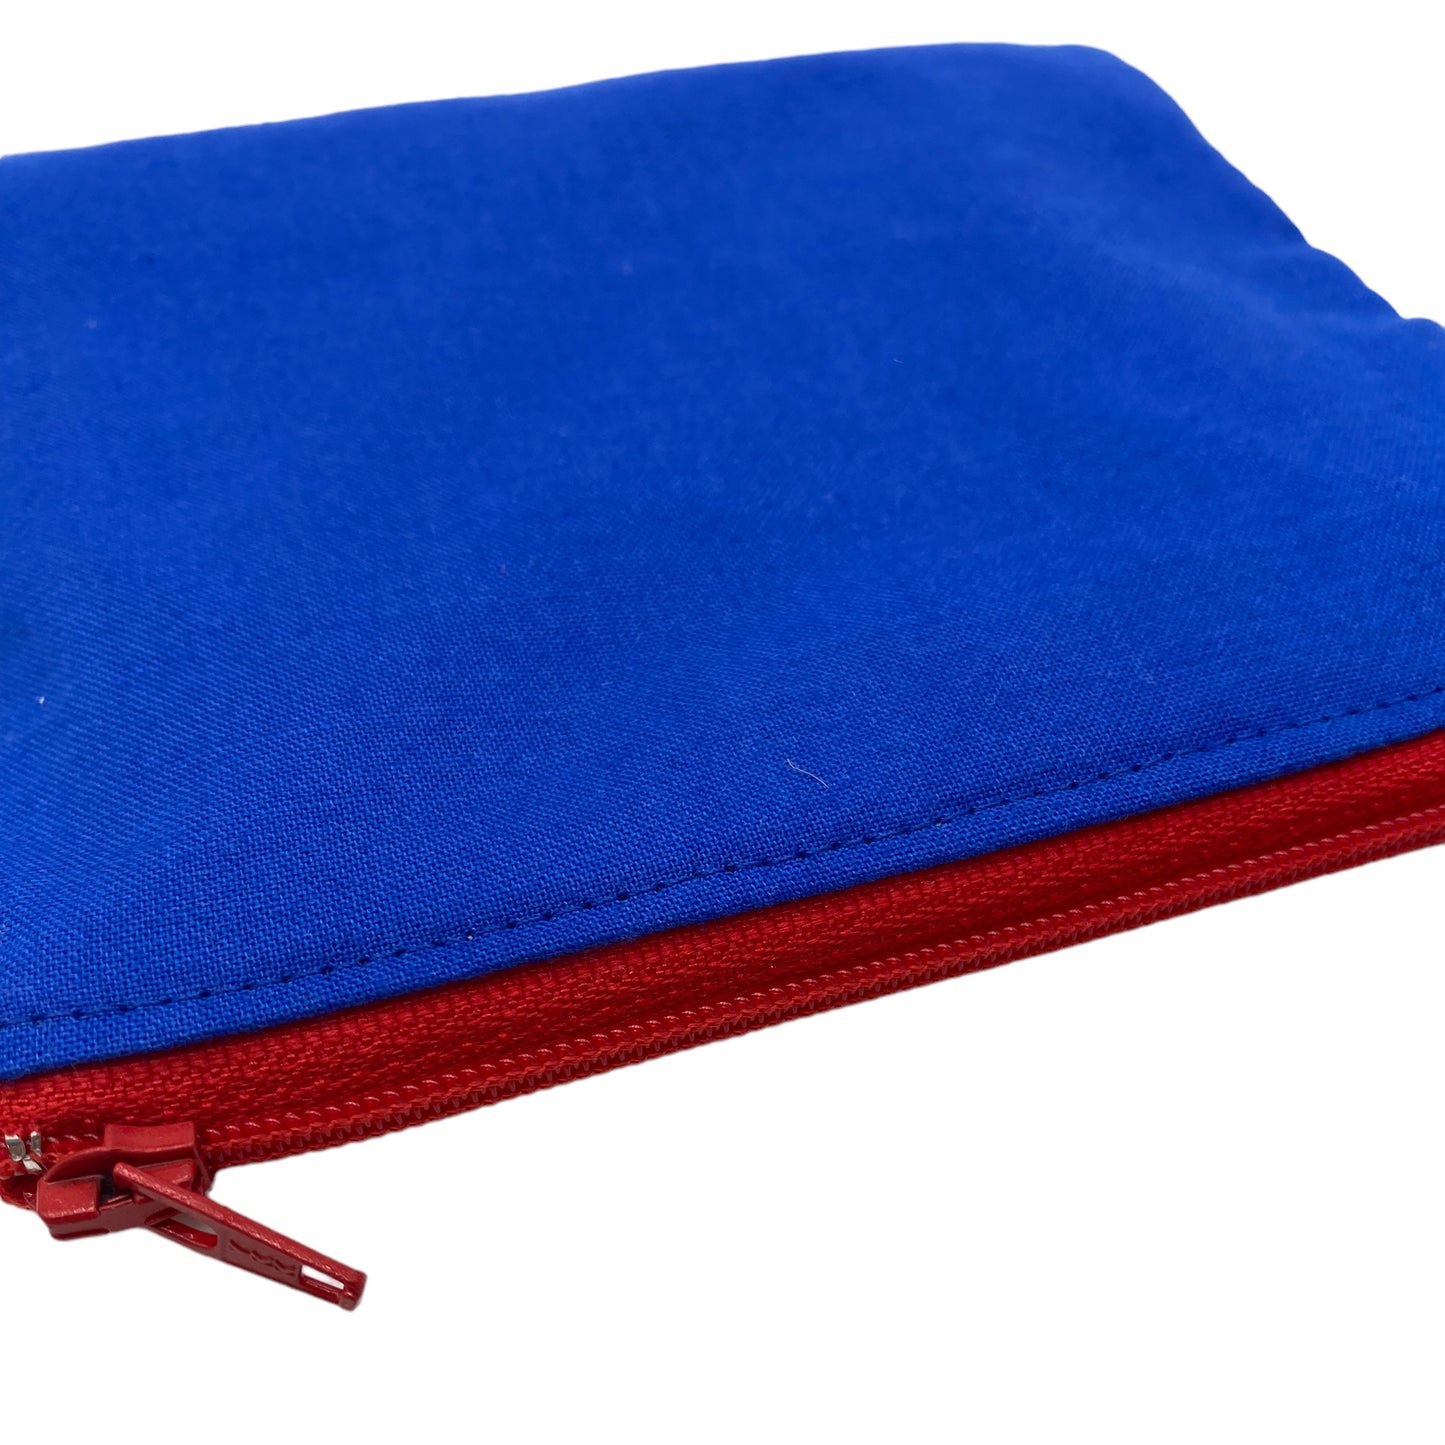 Toddler Sized Reusable Zippered Bag Solid Royal Blue